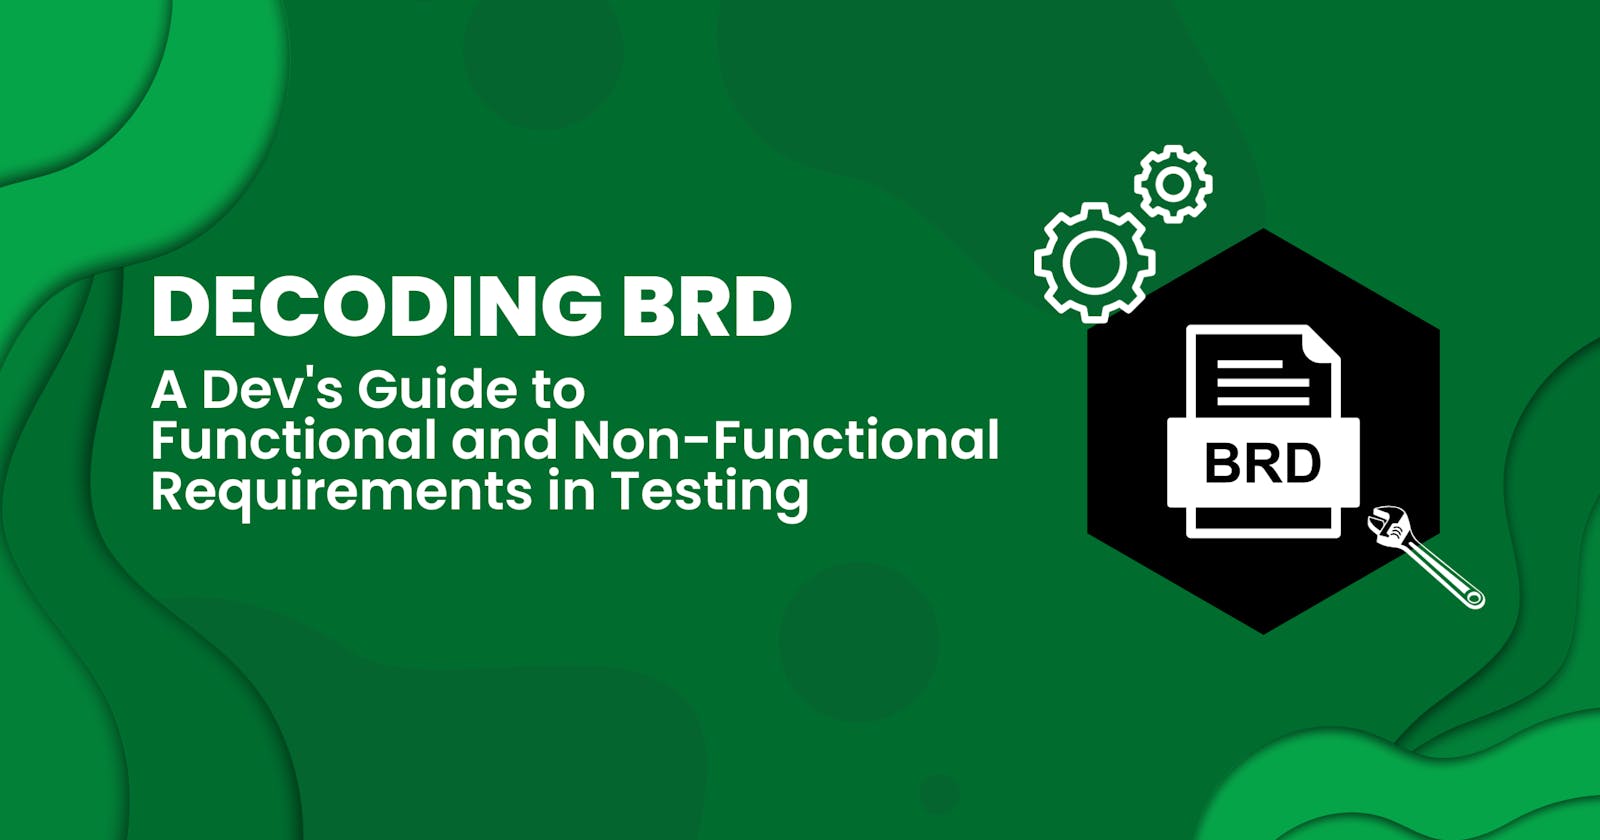 Decoding BRD: A Dev's Guide to Functional and Non-Functional Requirements in Testing